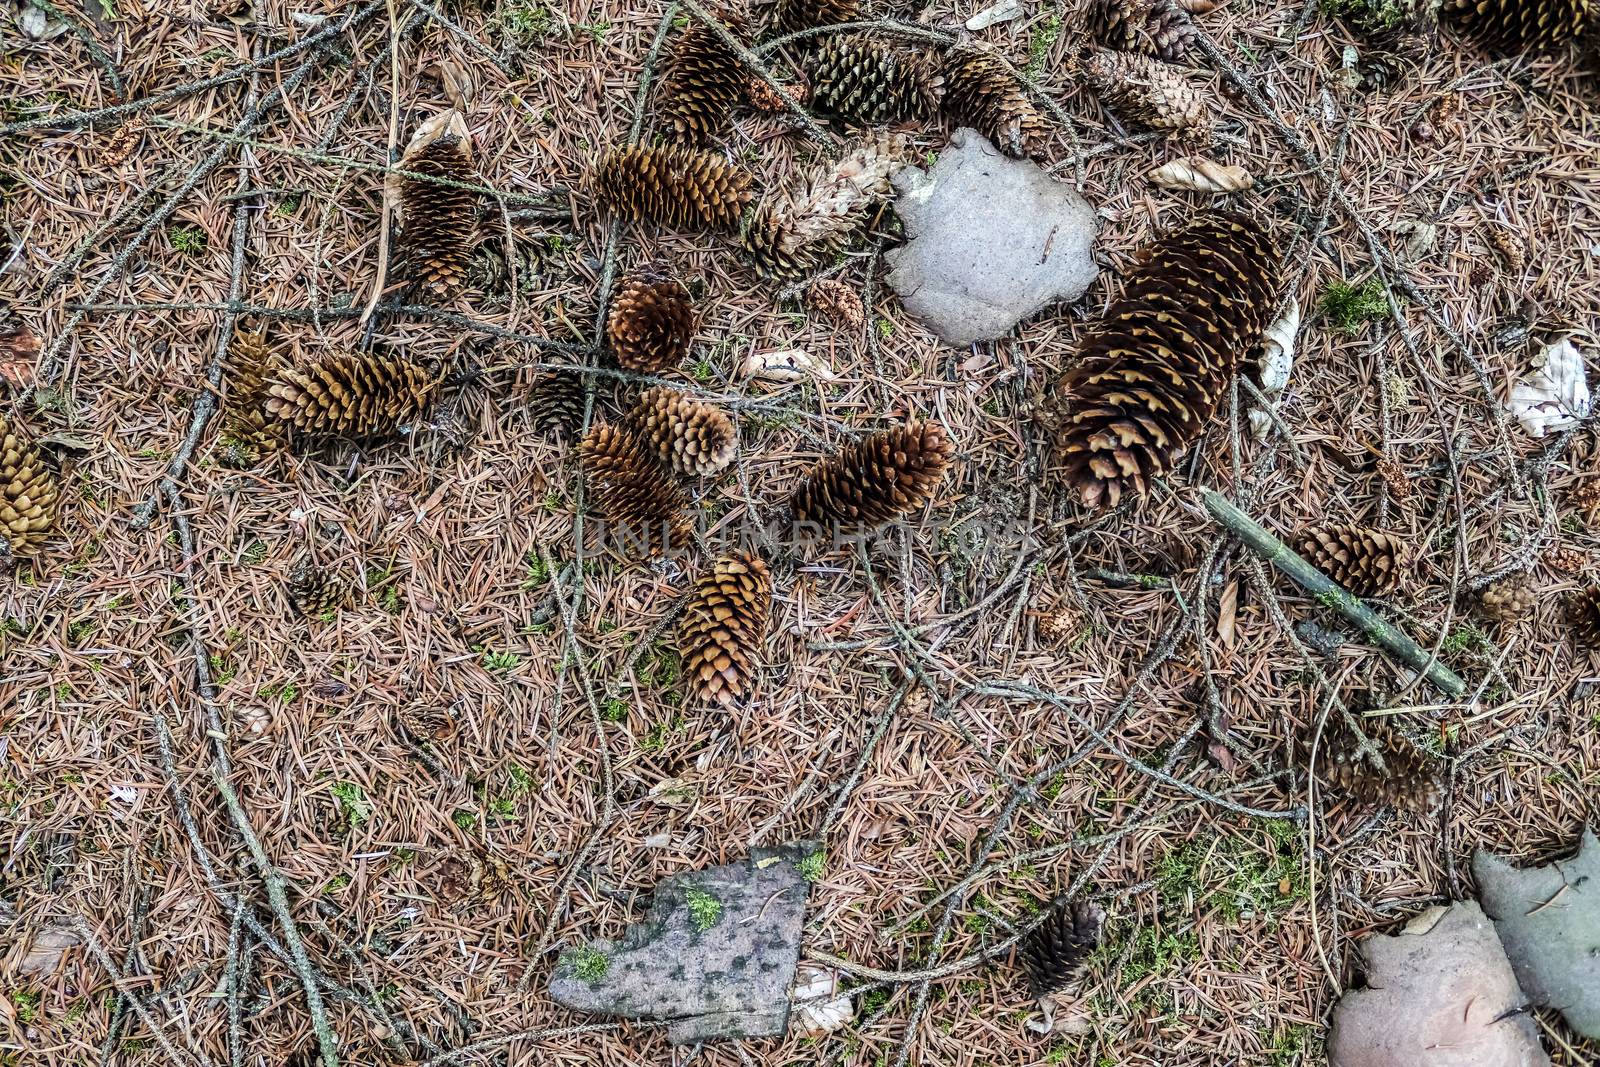 One long pine cone laying on the ground with brown needles in a  by MP_foto71